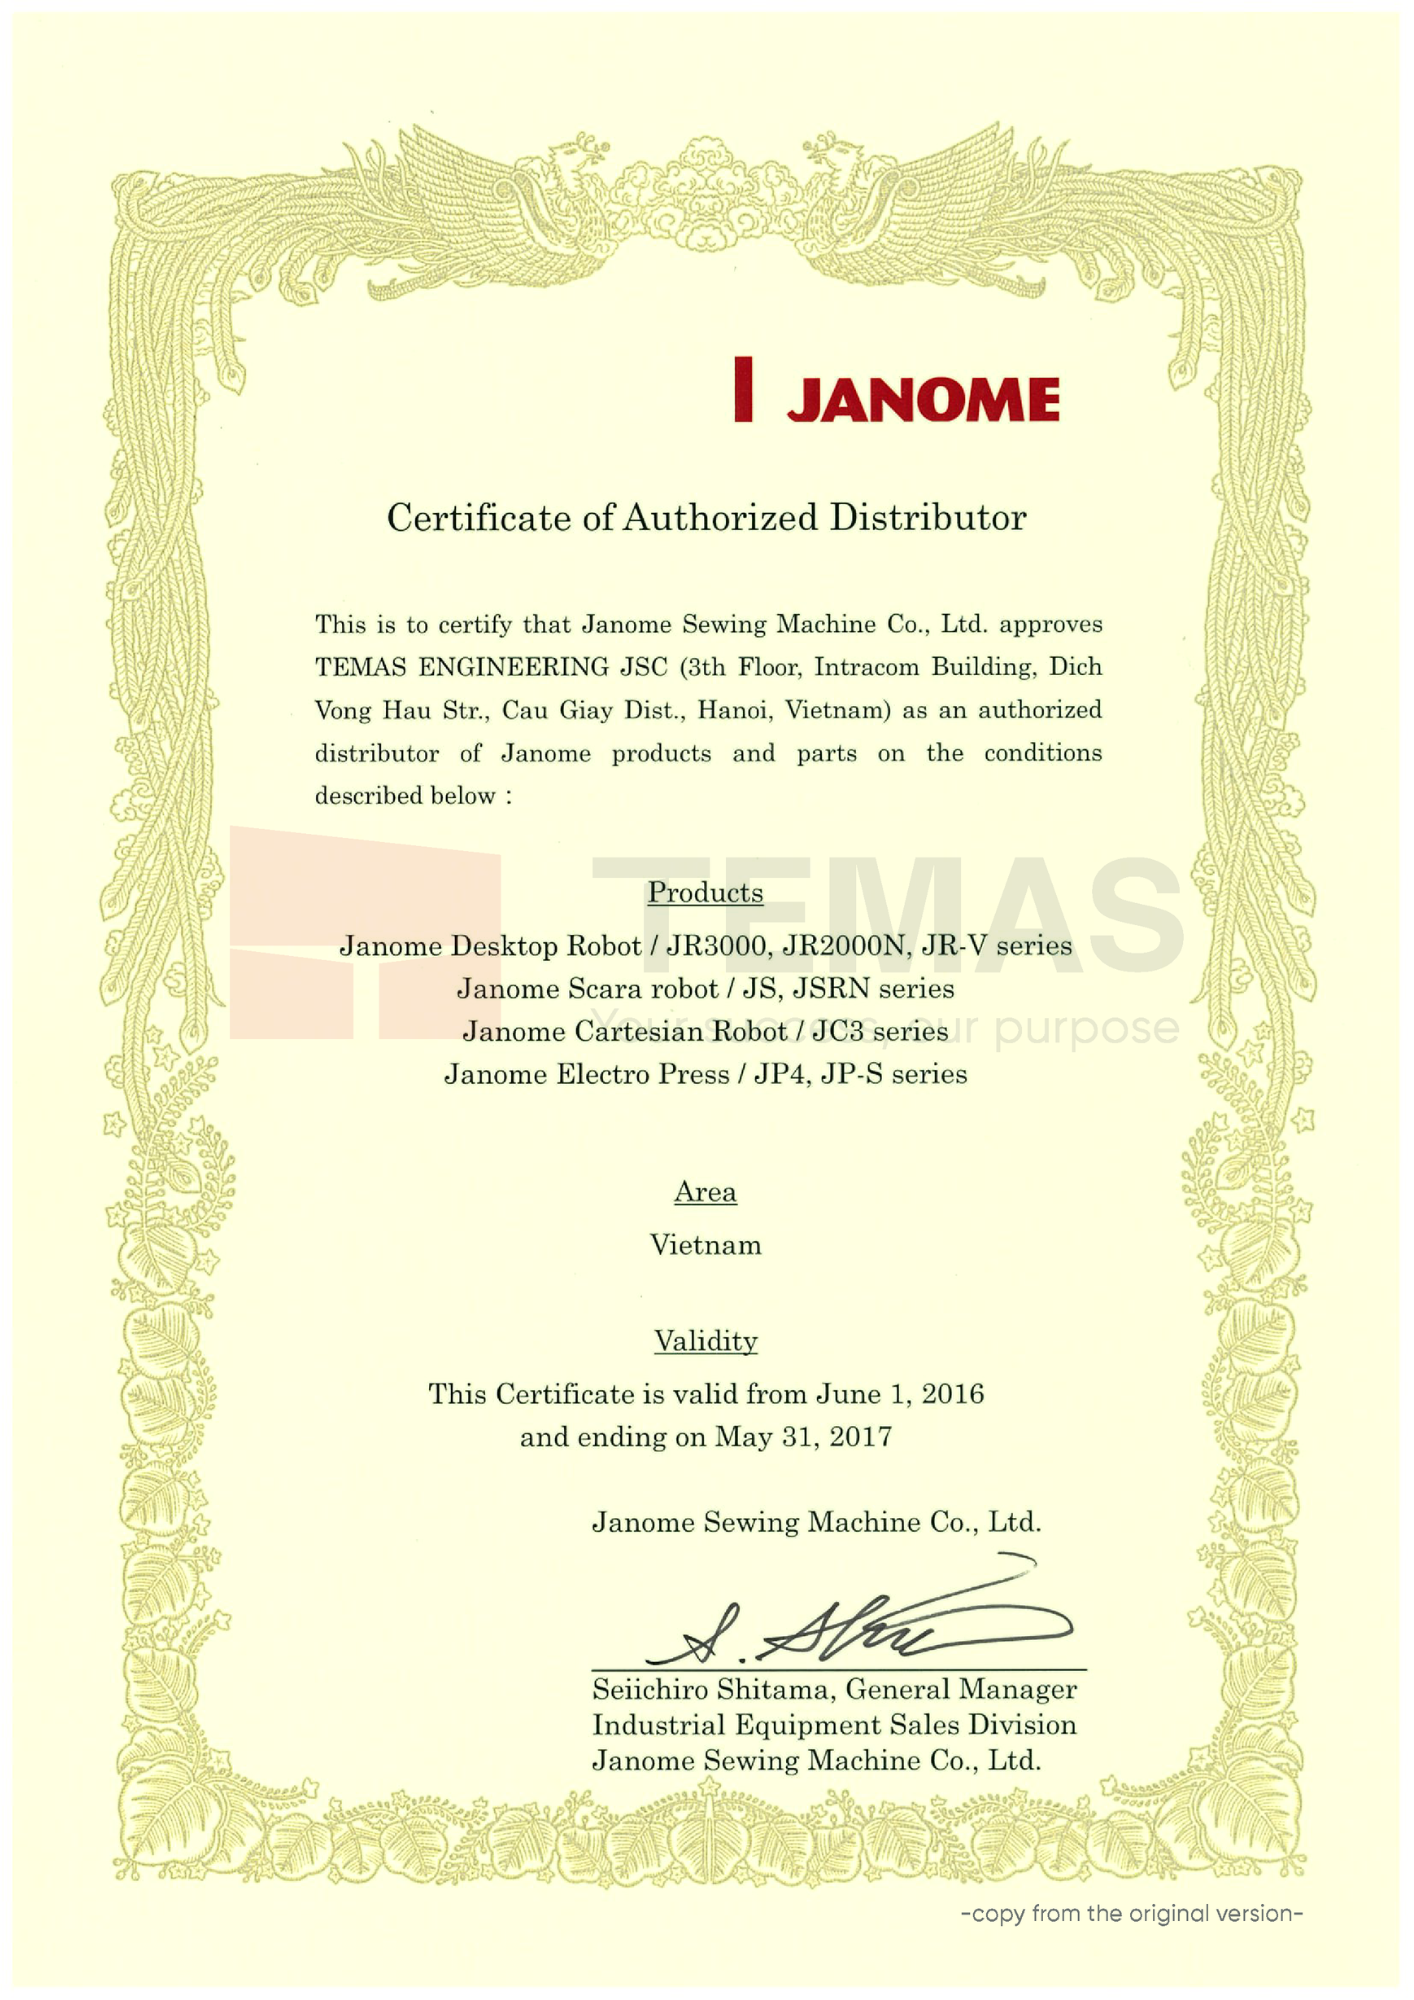 Janome [/br] Certificate of Authorized Distributor